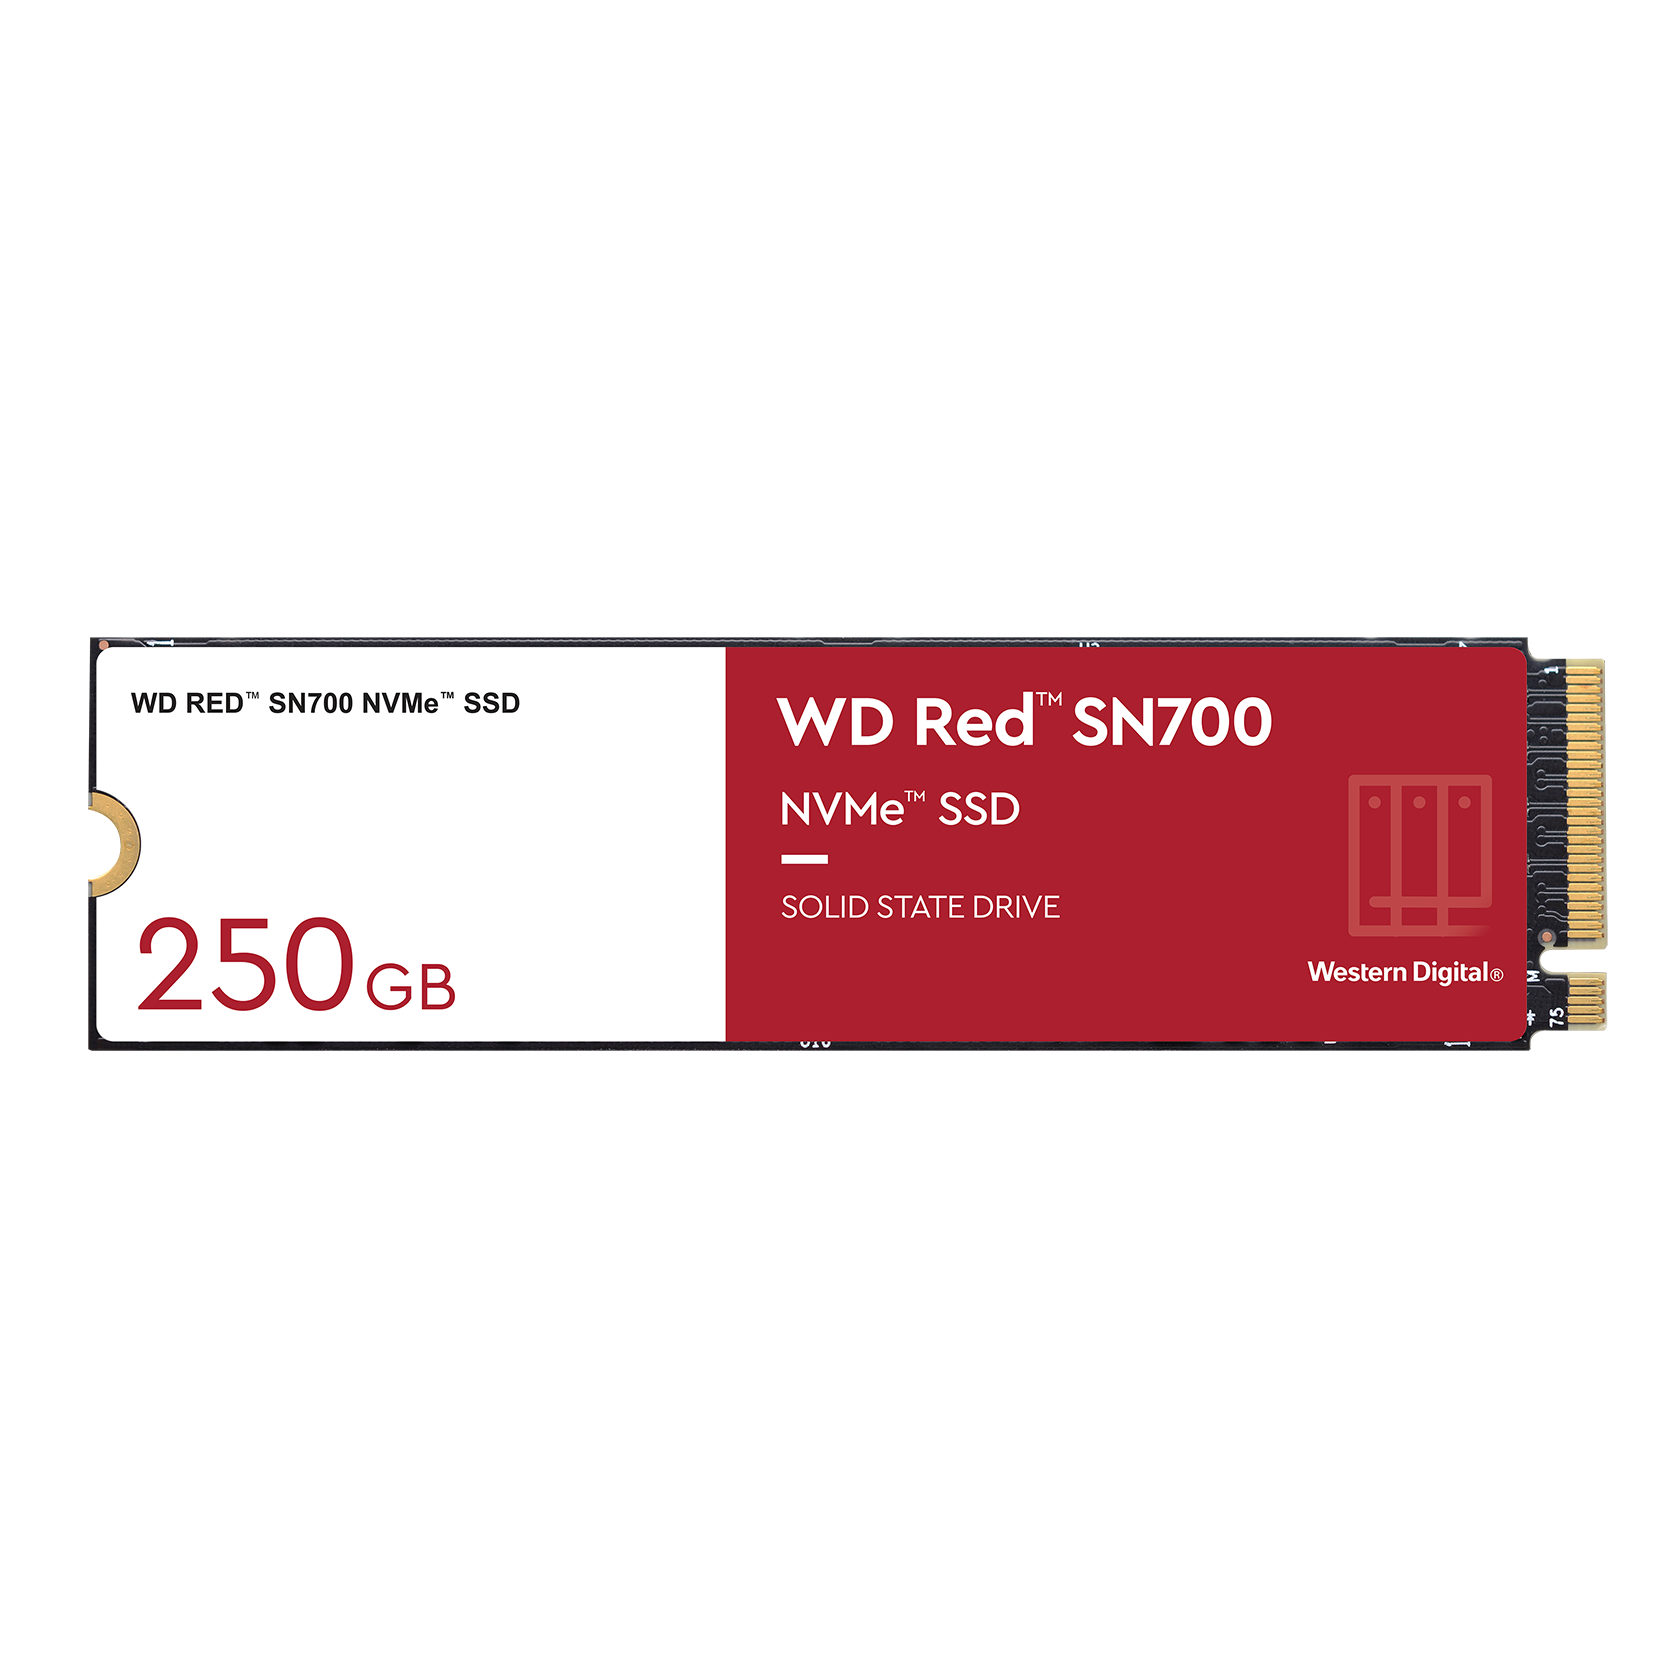 Western Digital WD Red™ SN700 NVMe™ - 250GB Solid State Drive - WDS250G1R0C